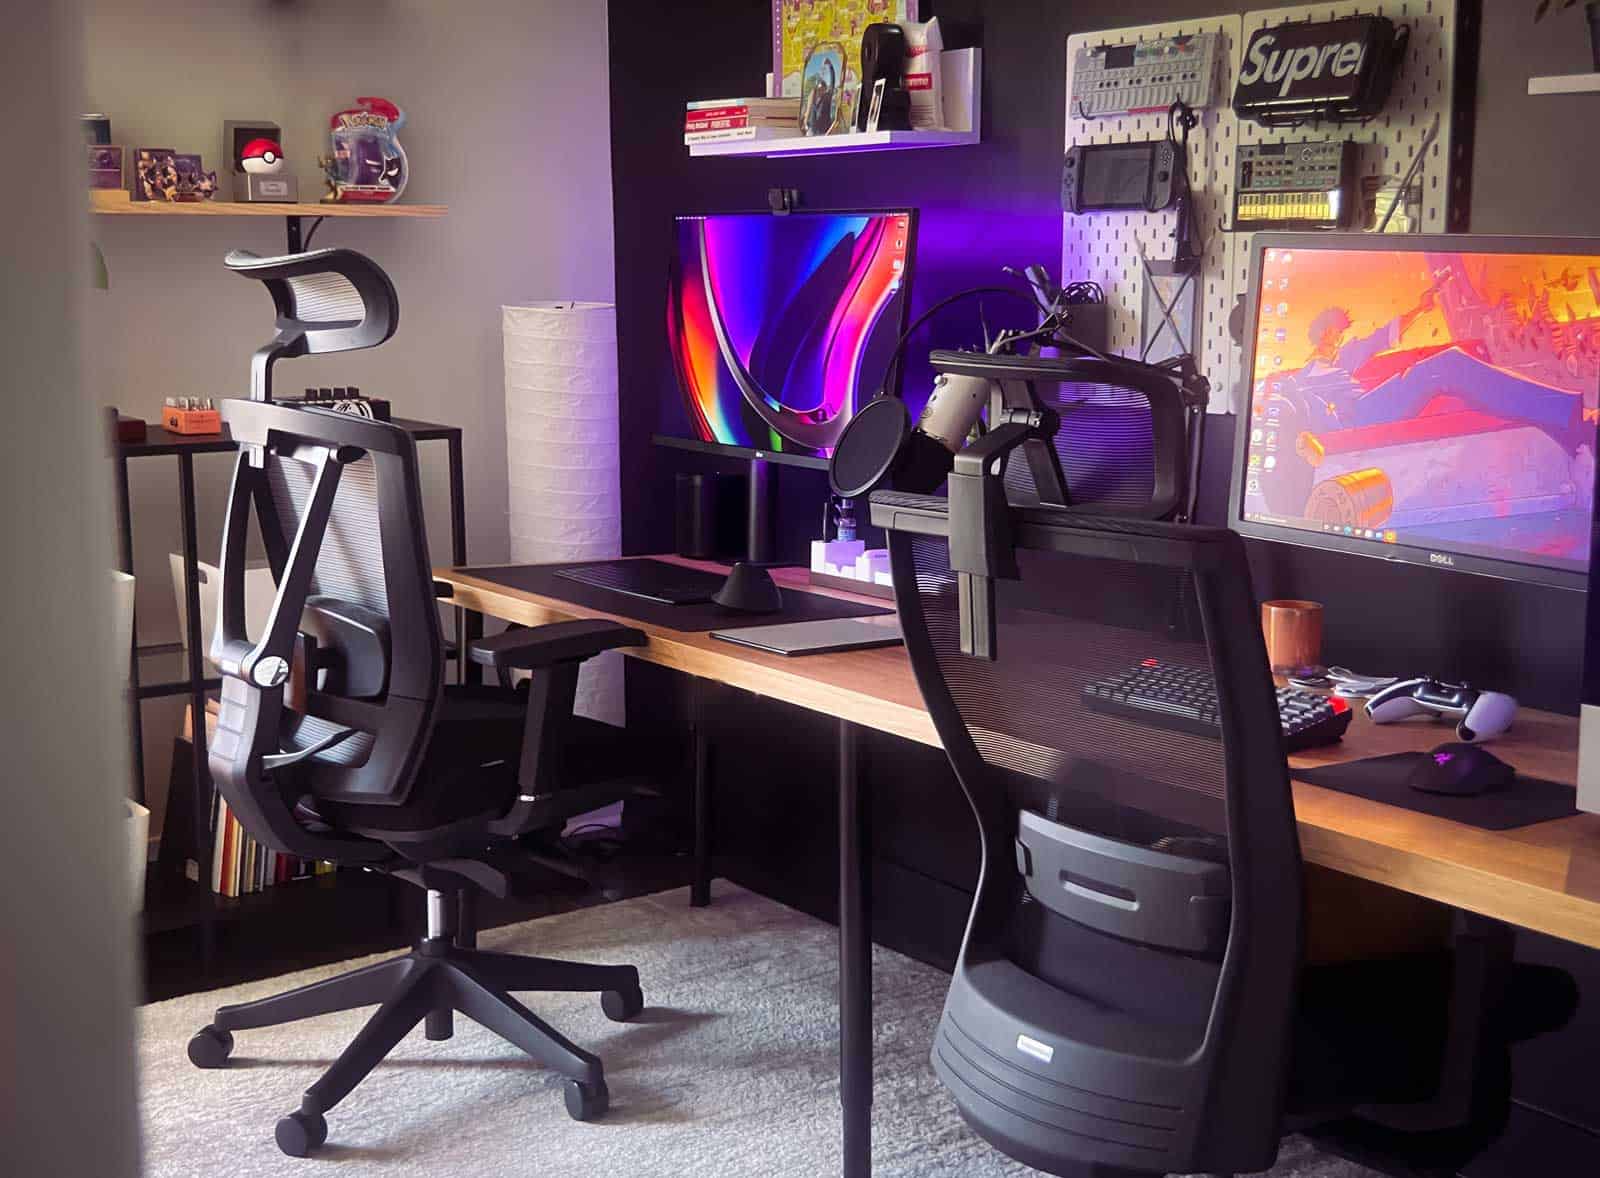 What should you put under your desk chair in your home office?